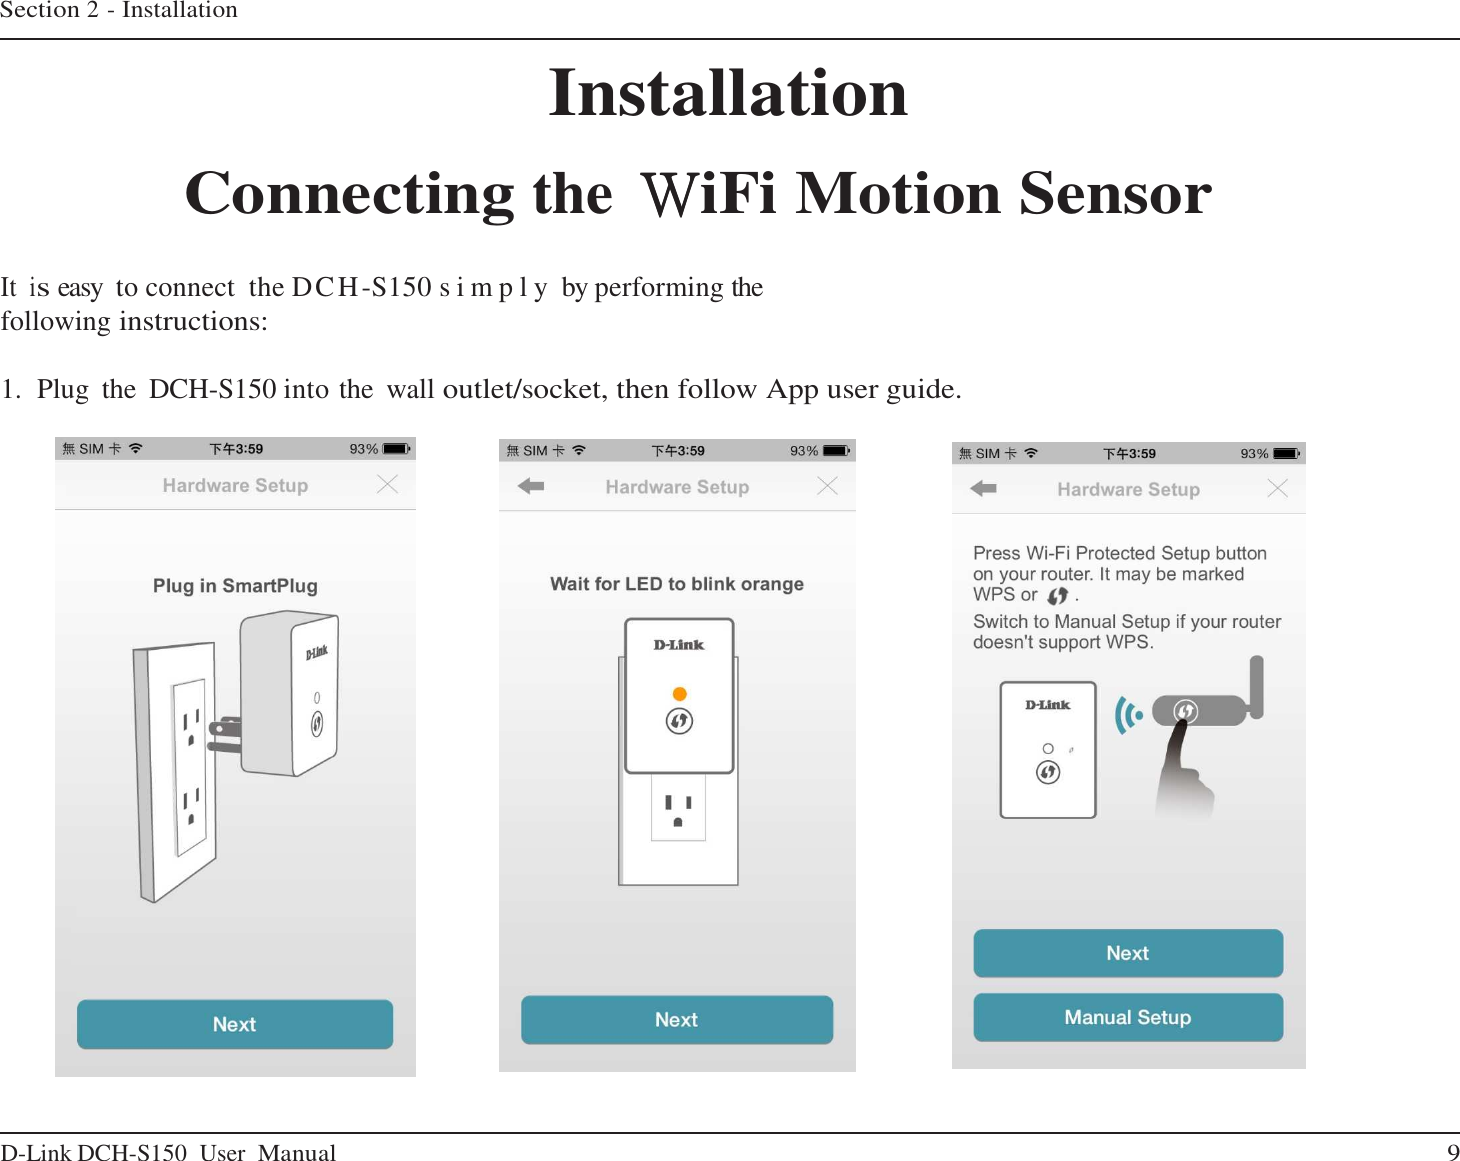 D-Link DCH-S150  User Manual 9   Section 2 - Installation    Installation  Connecting the WWWWiFi Motion Sensor   It is easy to connect the DCH-S150 s i m p l y  by performing the following instructions:   1.  Plug  the  DCH-S150 into the  wall outlet/socket, then follow App user guide.                                     